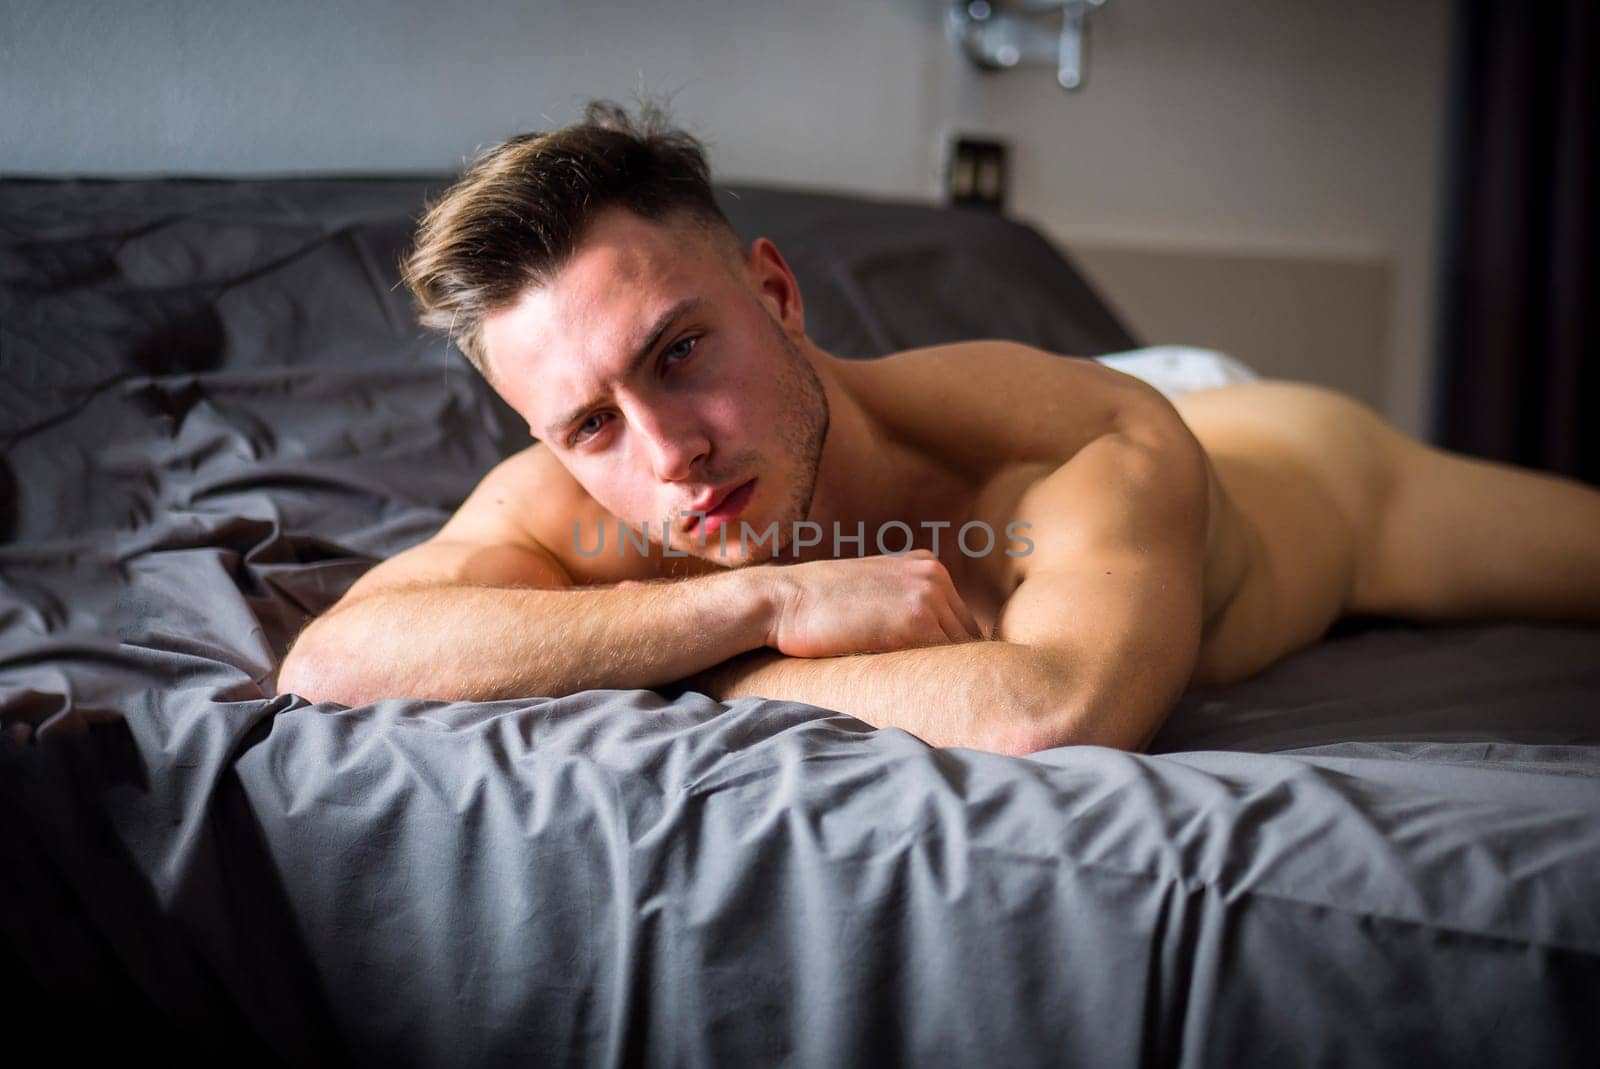 Sexy naked young man on bed at home by artofphoto